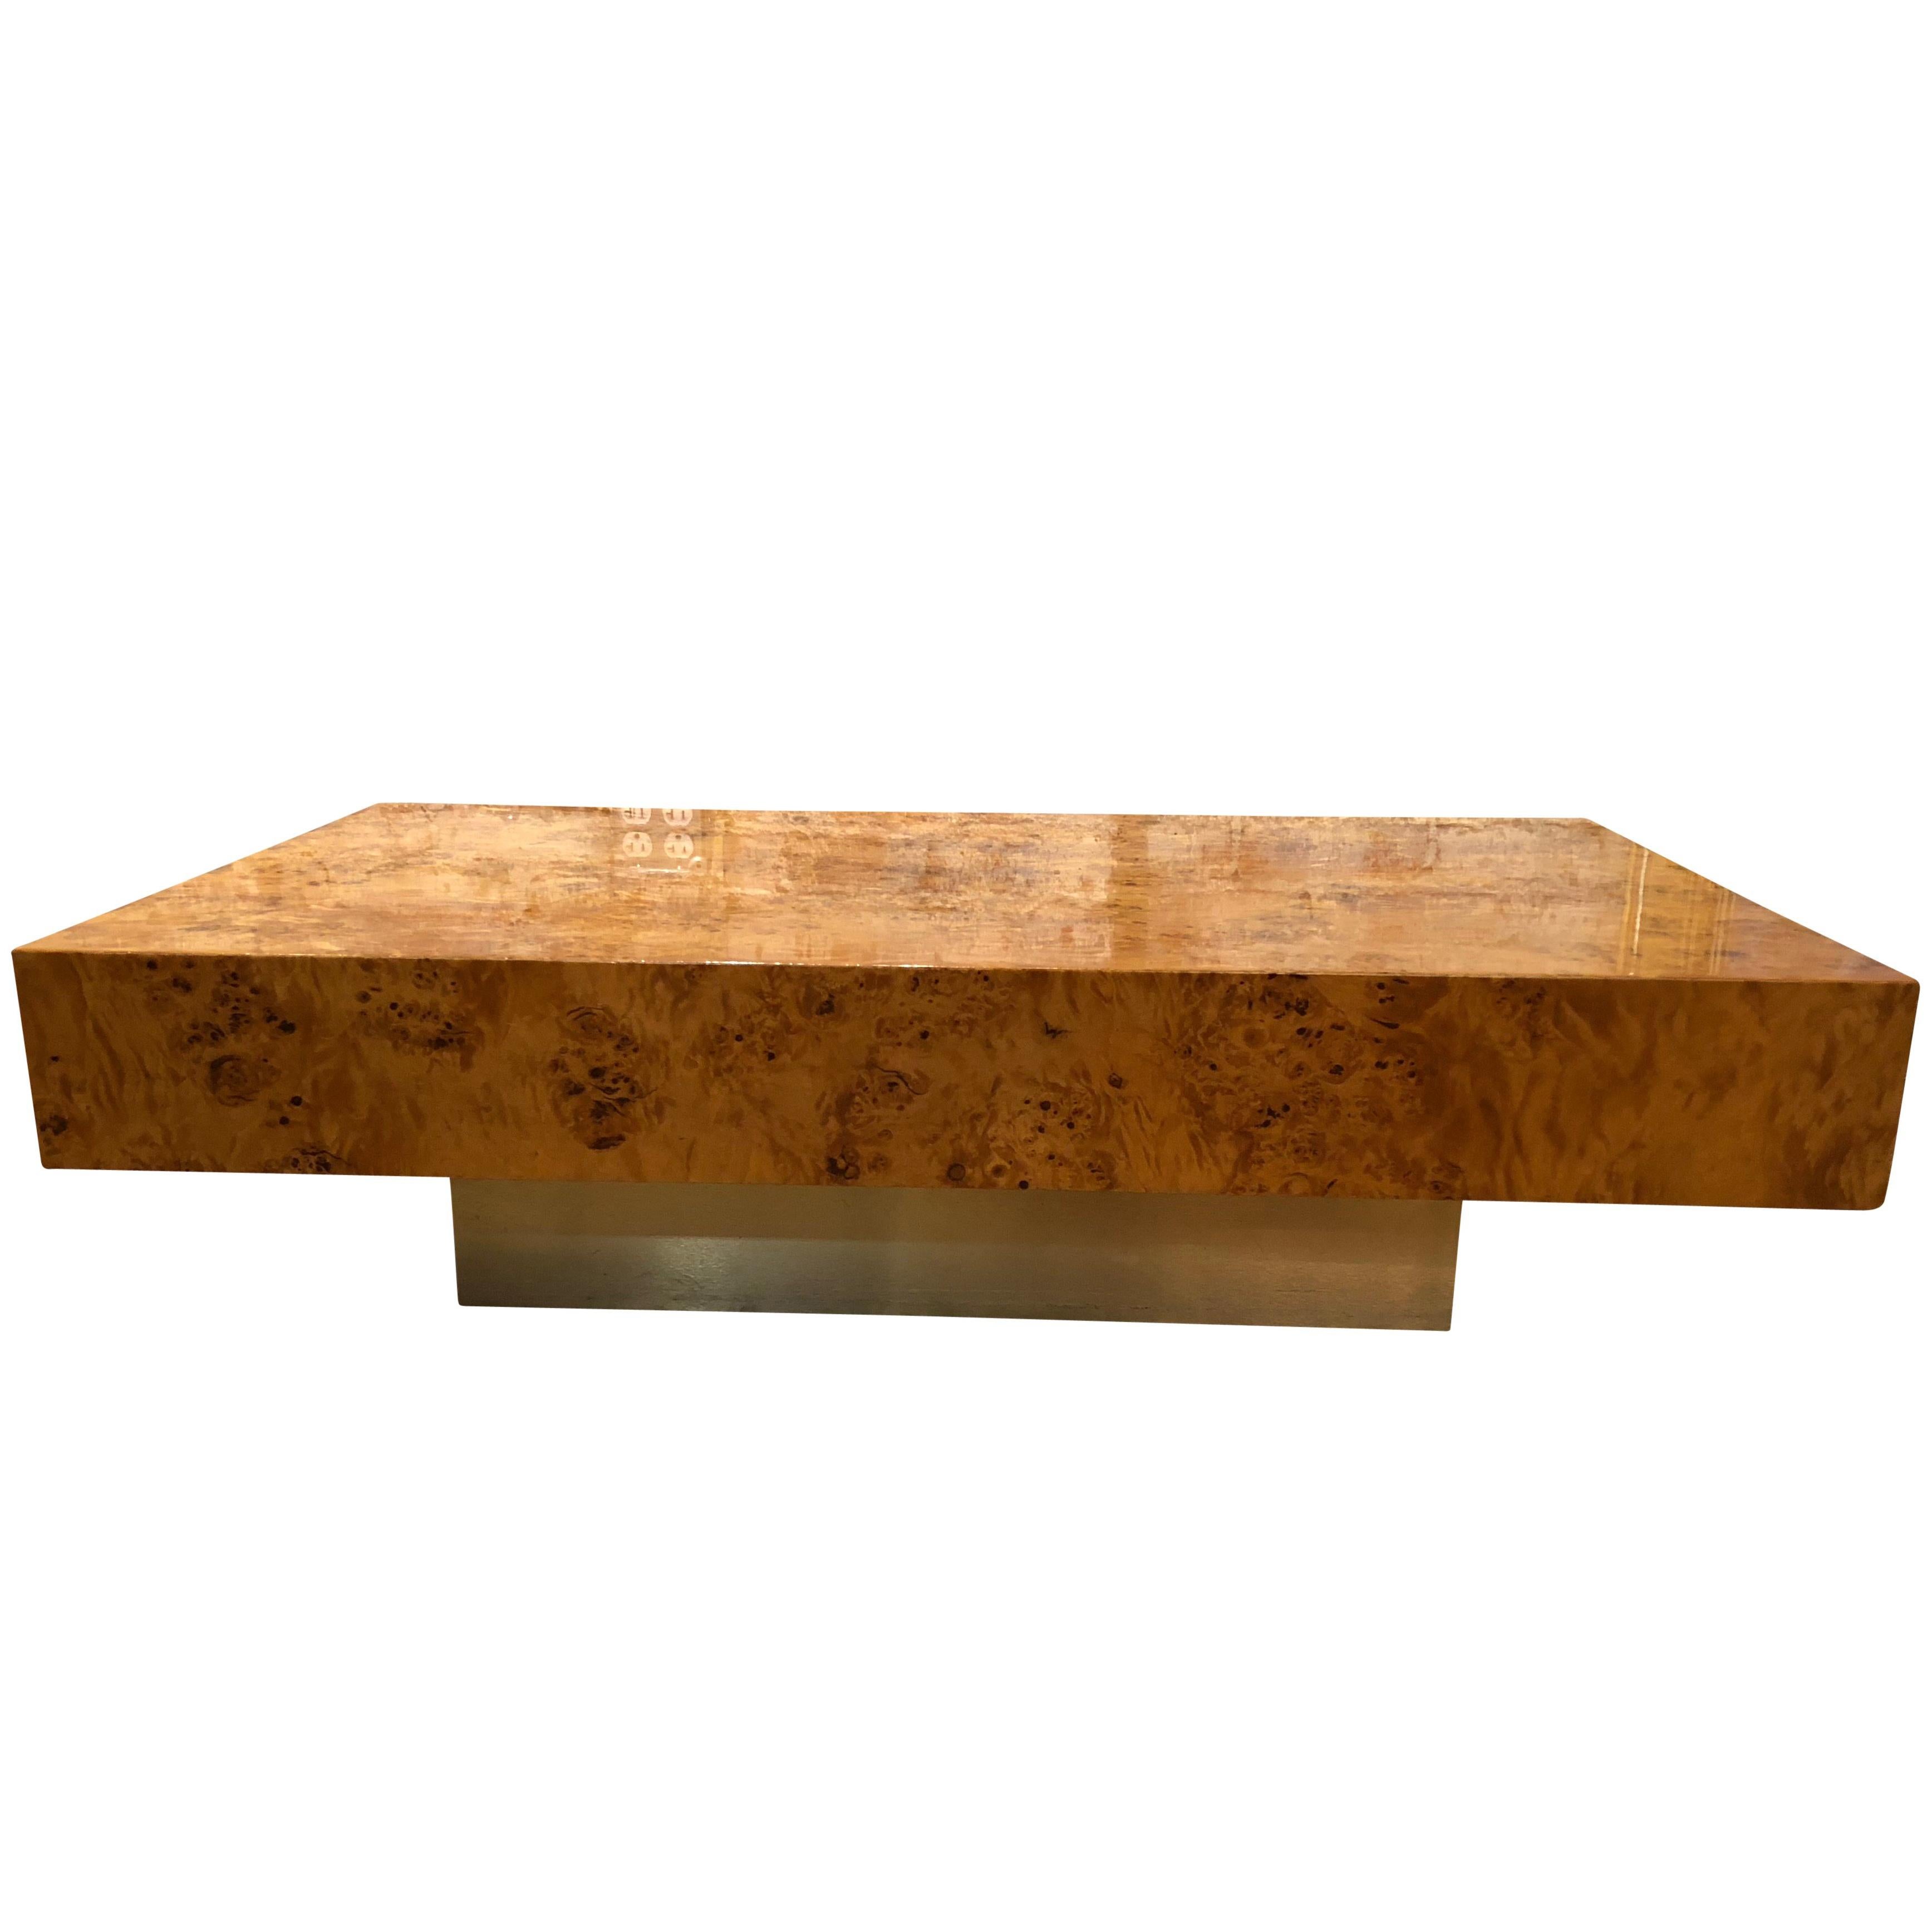 Attractive Vintage French Burl Wood Coffee Table Made by Christofle Paris